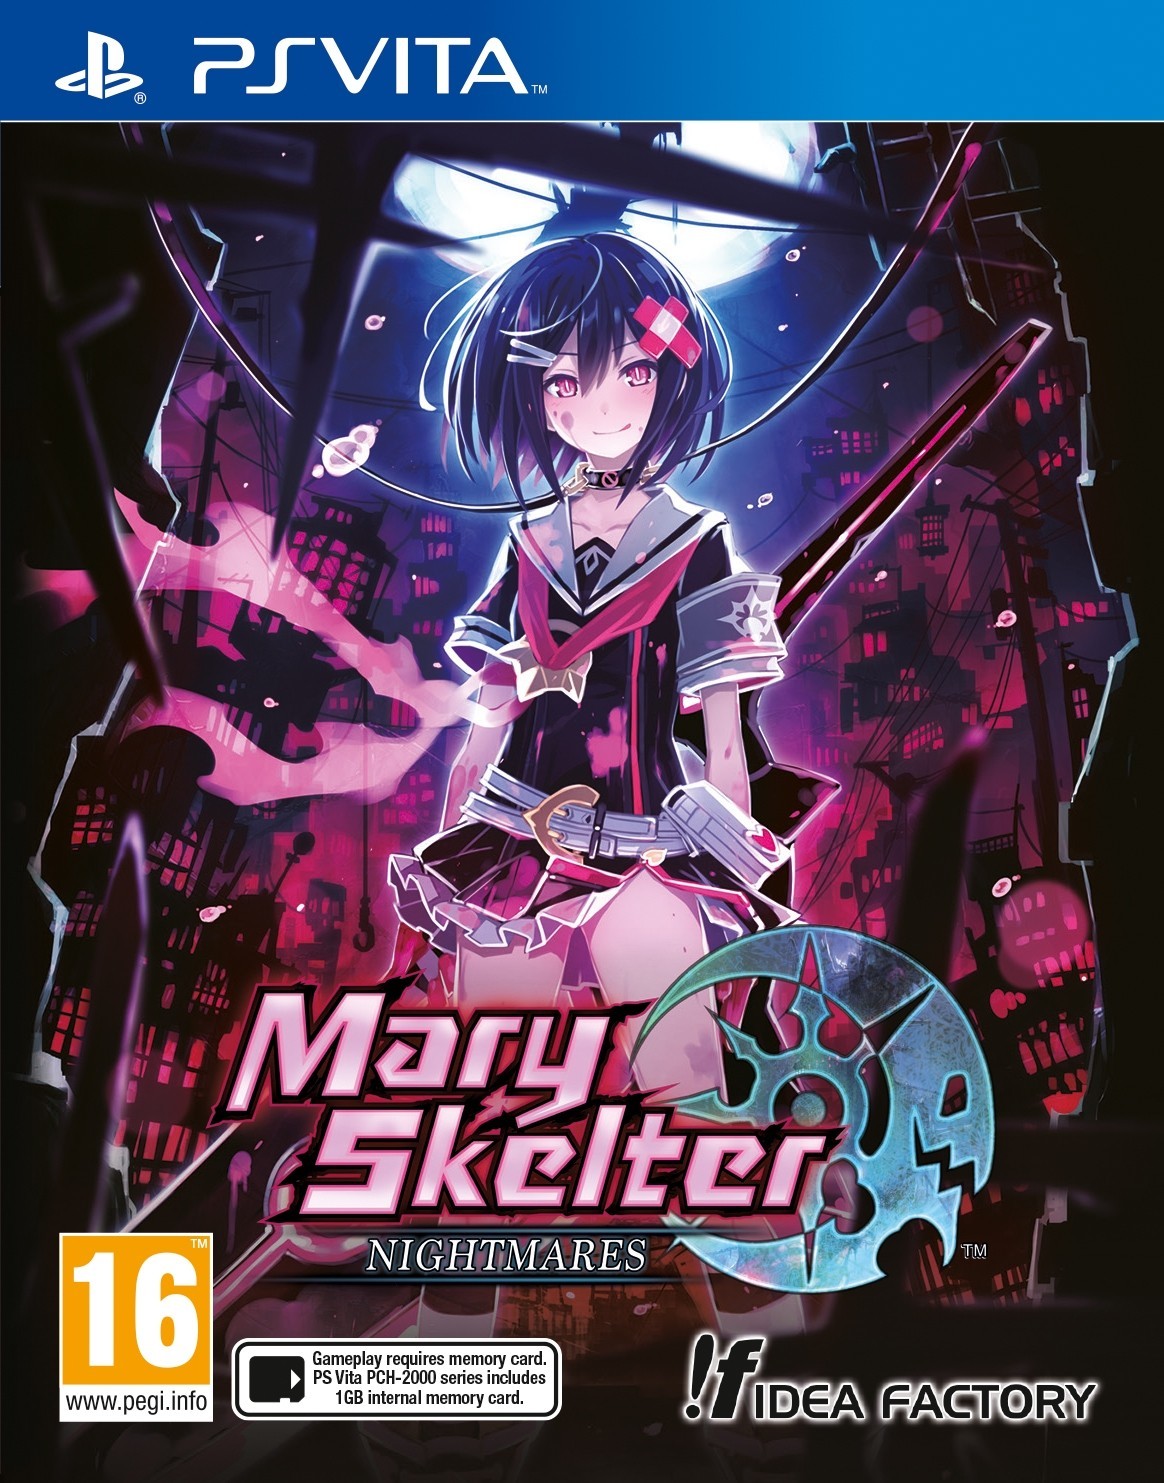 Mary Skelter: Nightmares (PSVita), Idea Factory, Compile Heart